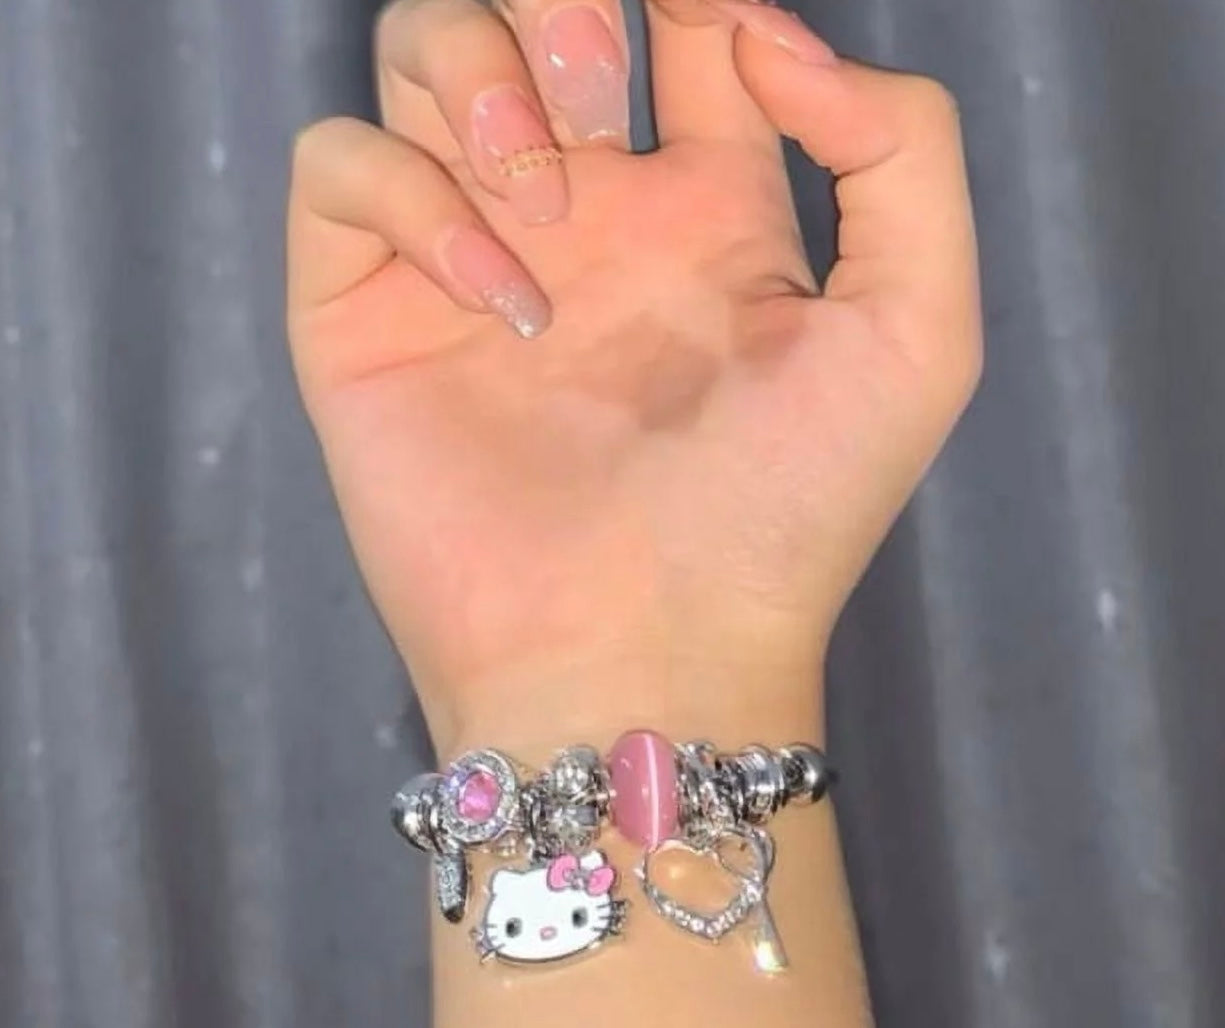 Lovely Hello Kitty Charm Bracelet - Free Shipping to N.A. - Puddle